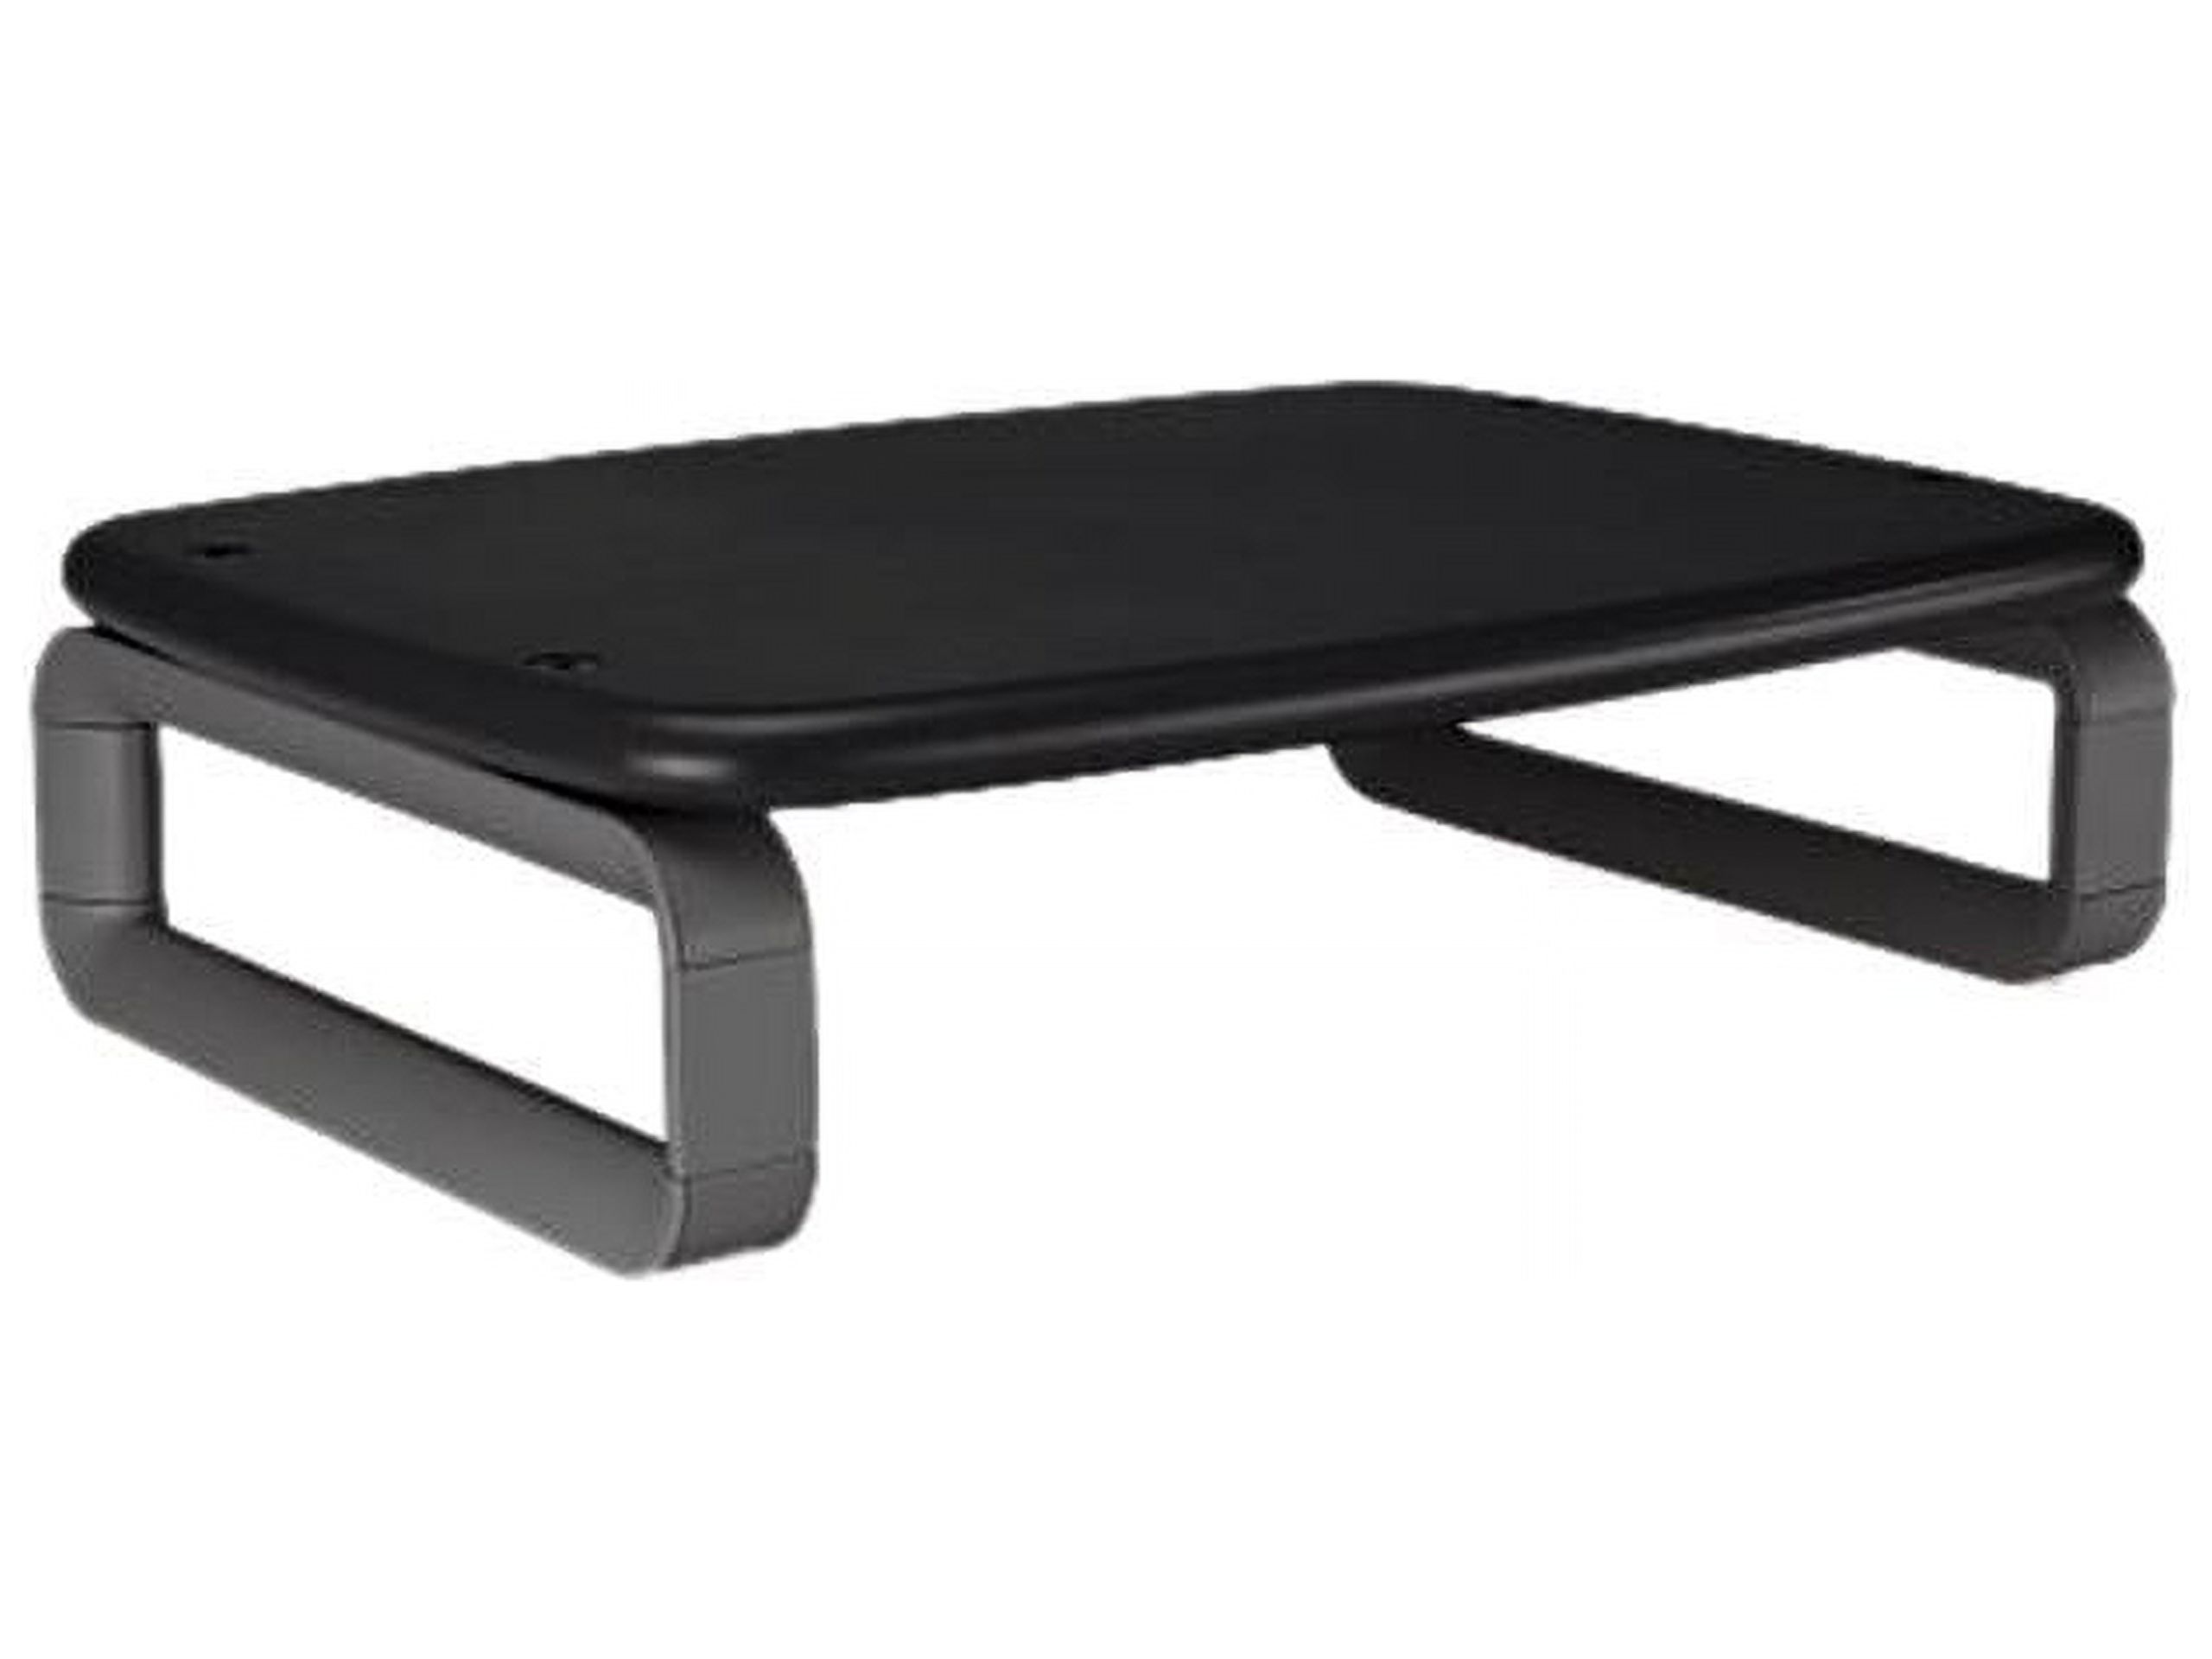 Kensington Monitor Stand Plus with SmartFit System, 16 x 11 5/8 x 6, Black/Gray - image 1 of 5